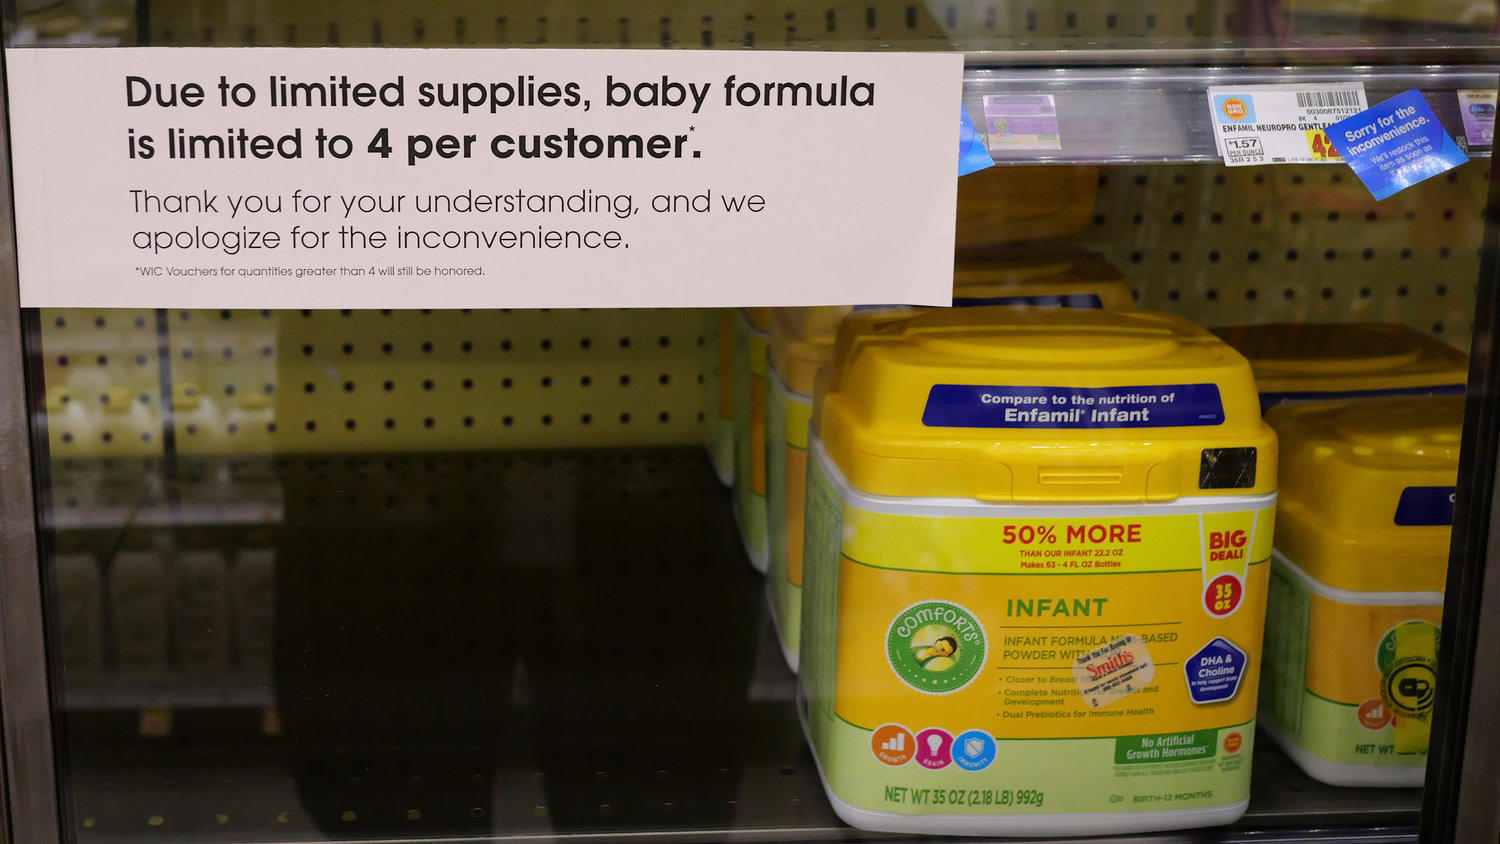 A due to limited supplies sign is displayed on the baby formula shelf at a grocery store Tuesday, May 10, 2022, in Salt Lake City. Parents across much of the U.S. are scrambling to find baby formula after a combination of supply disruptions and safety recalls have swept many of the leading brands off store shelves. (AP Photo/Rick Bowmer)